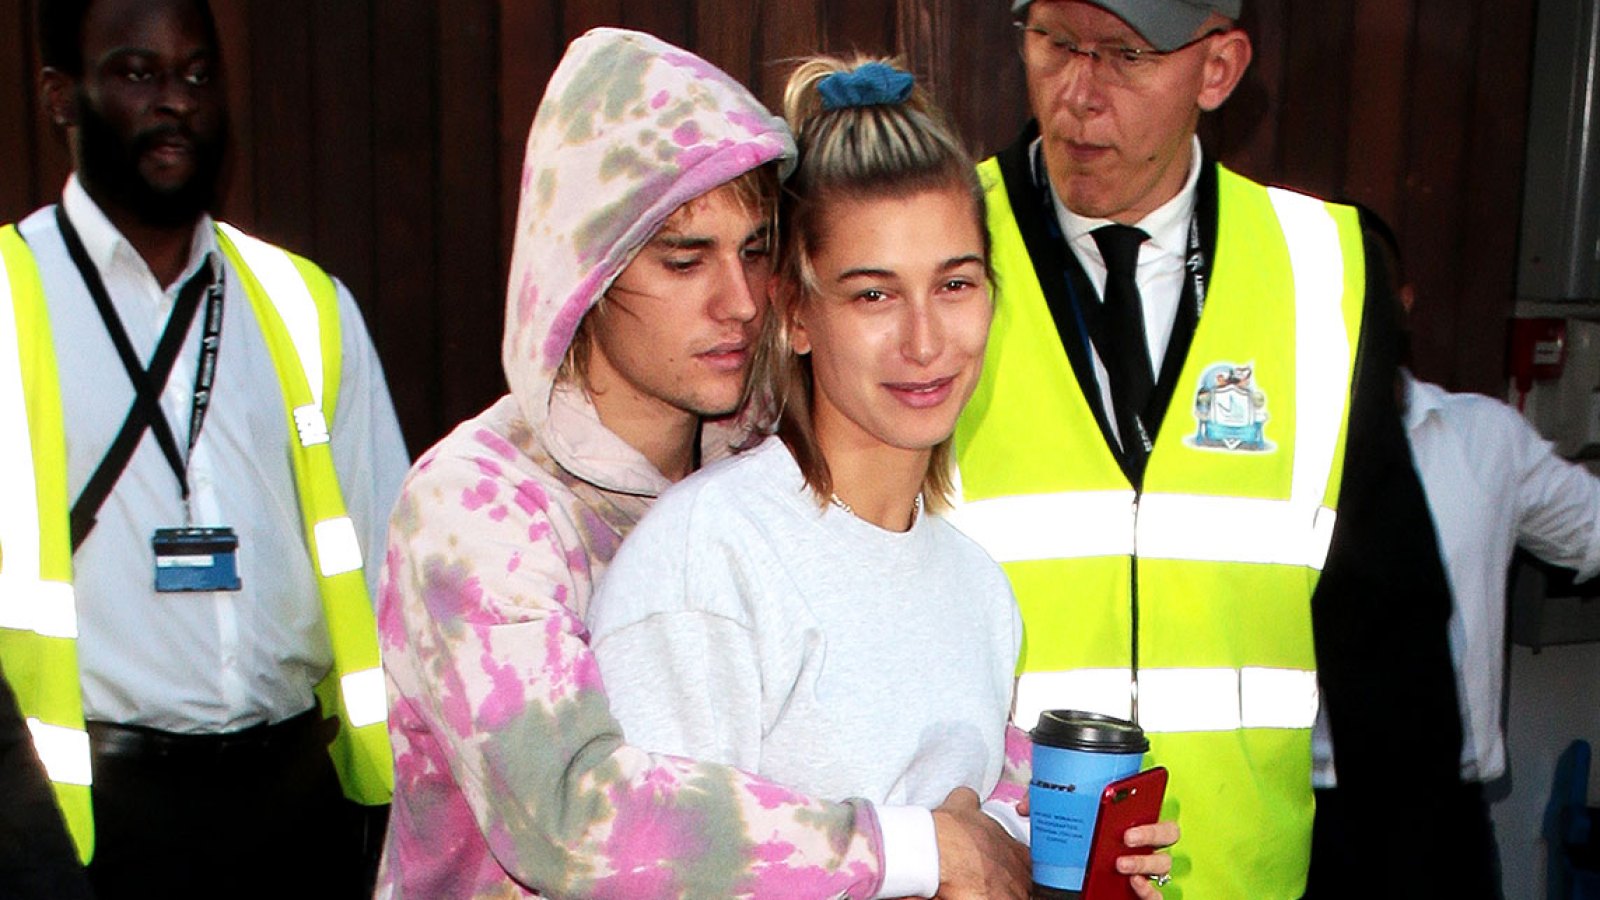 Hailey Baldwin Has ‘Been So Supportive’ of Justin Bieber While He Seeks Therapy For Depression, Trust Issues